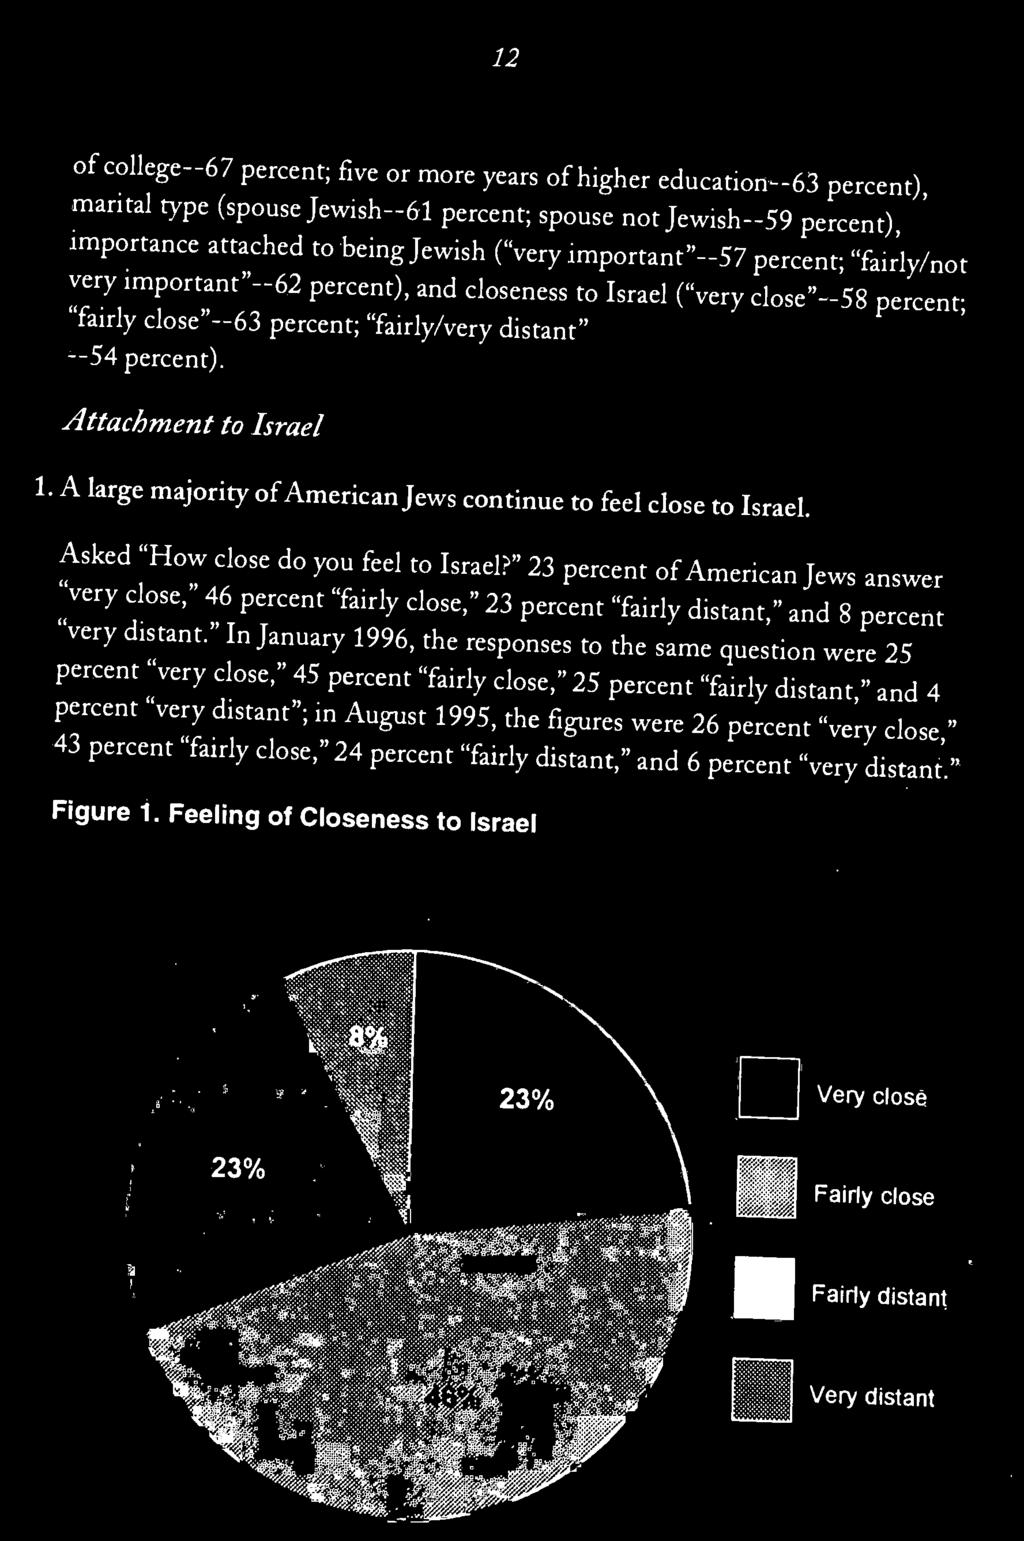 " In January 1996, the responses to the same question were 25 percent "very close," 45 percent "fairly close," 25 percent "fairly distant," and 4 percent "very distant"; in